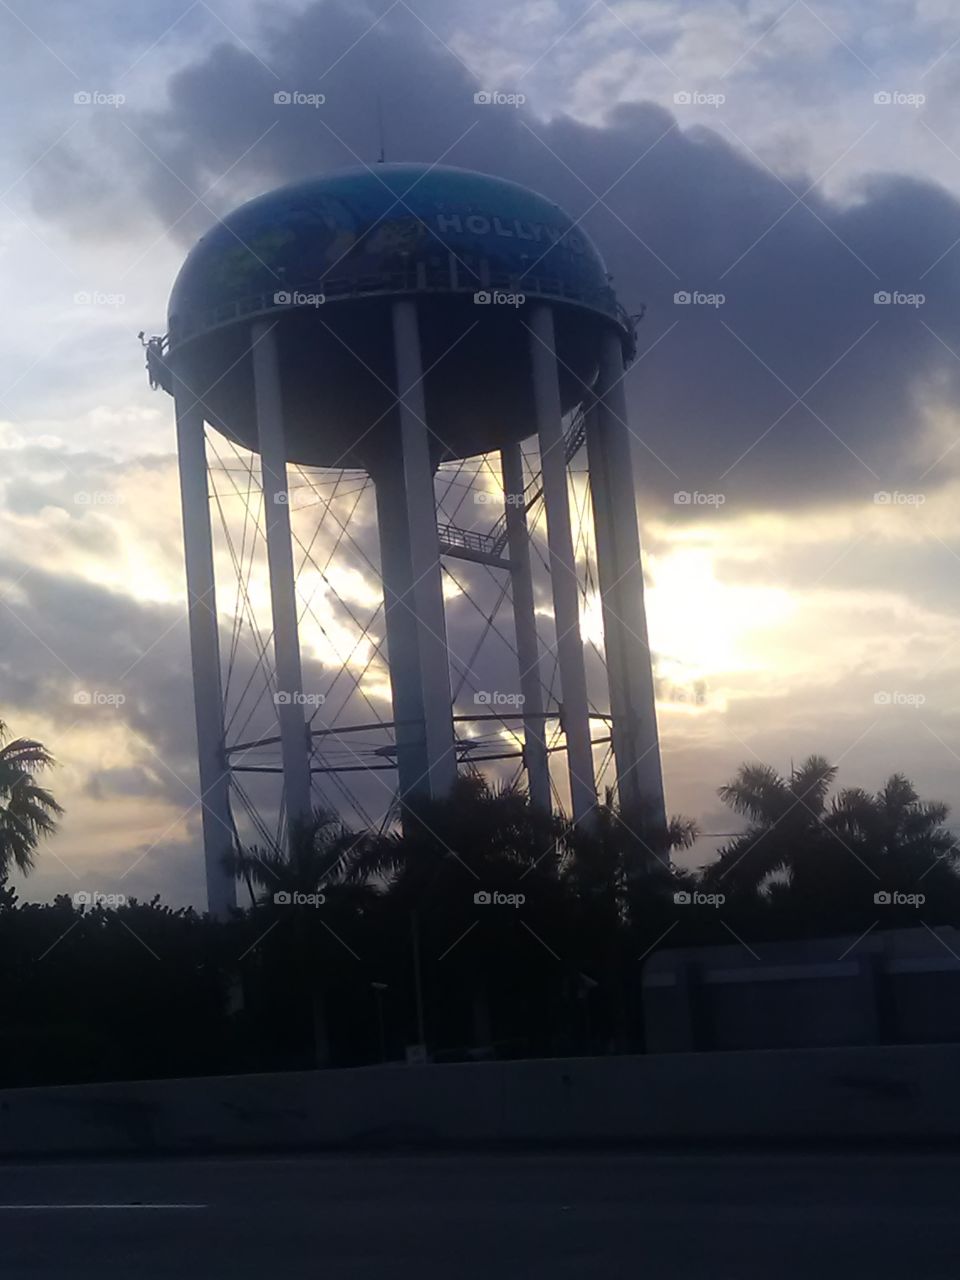 I was taking pictures in my way to downtown Hollywood, Florida